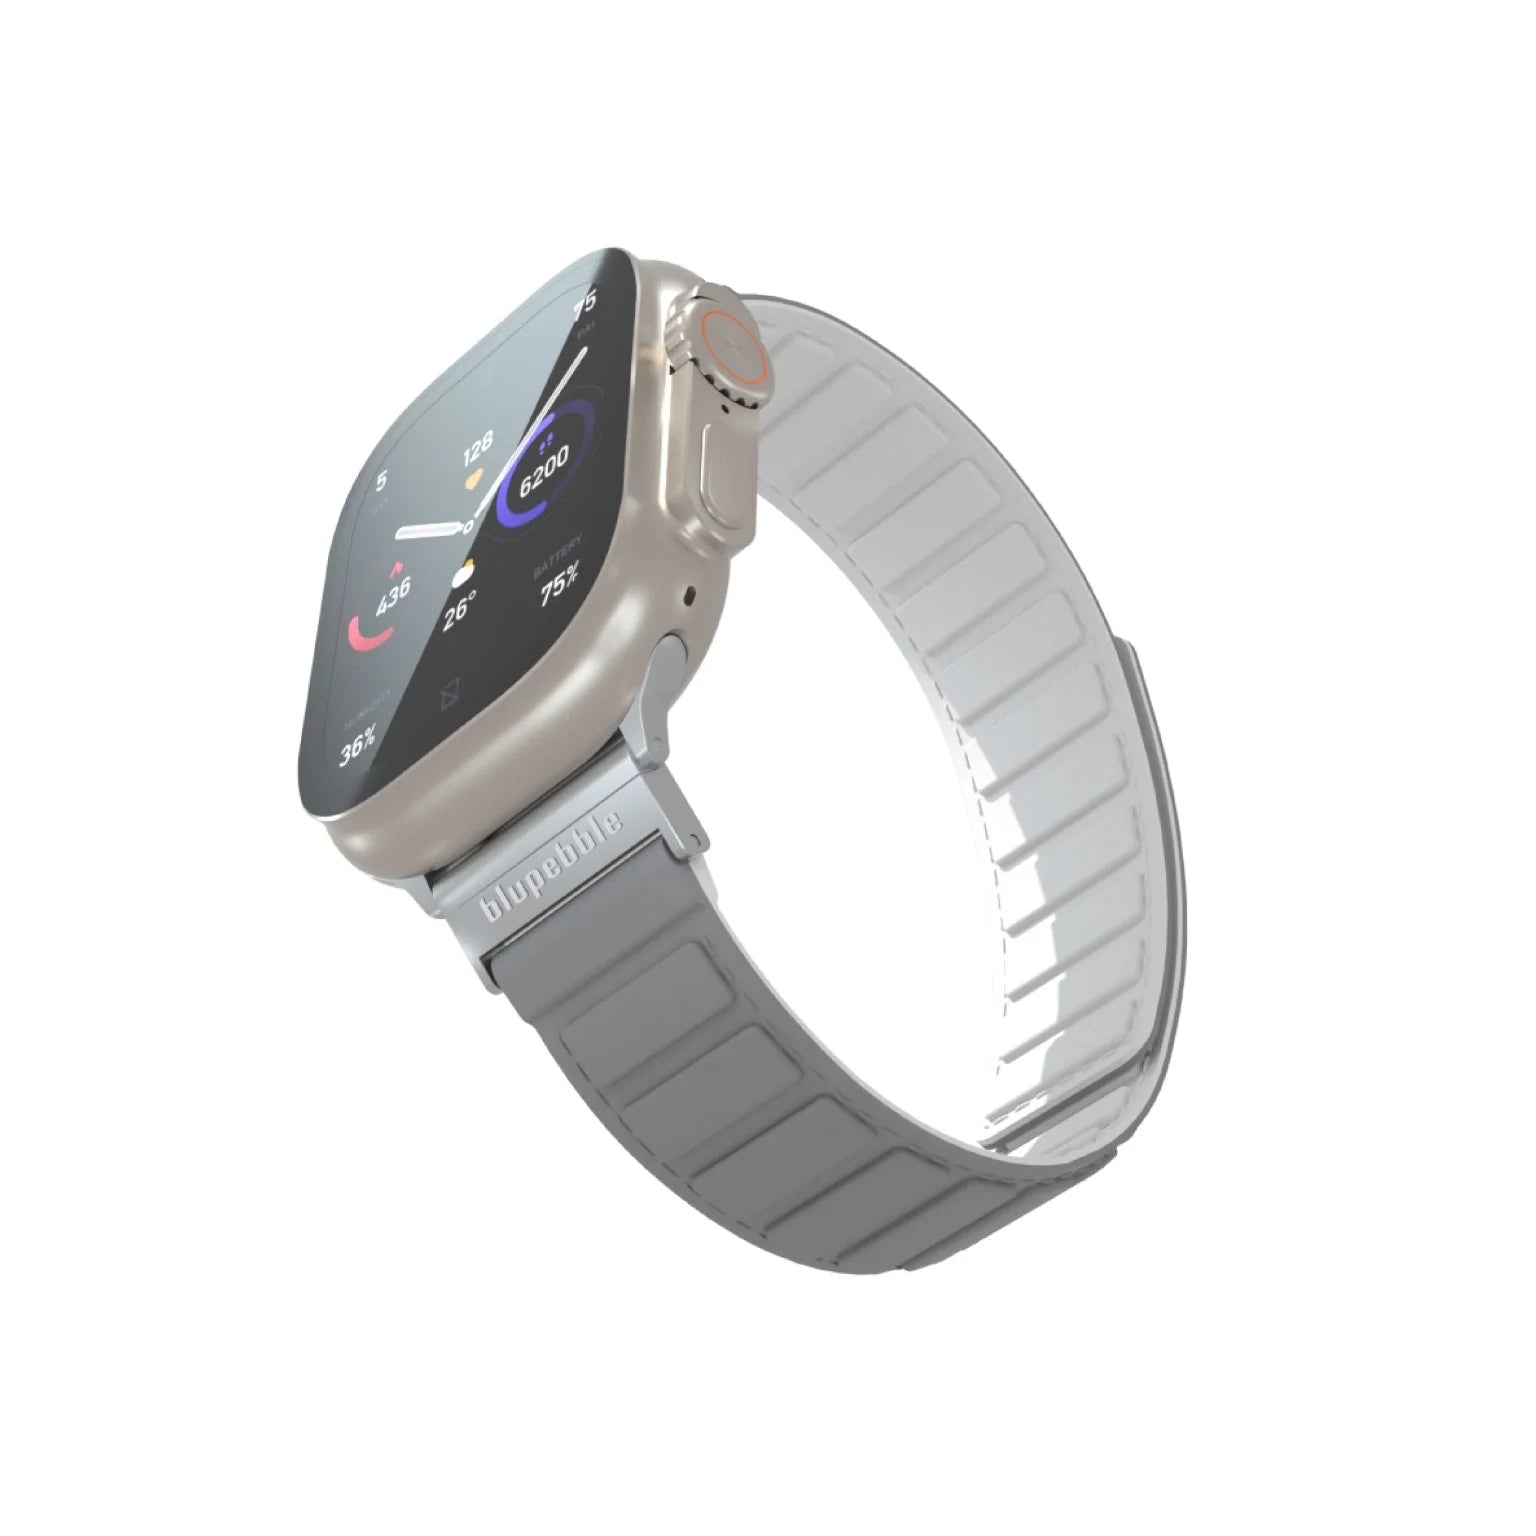 Blupebble Silicone Reversible Magnetic Strap - Gray/White